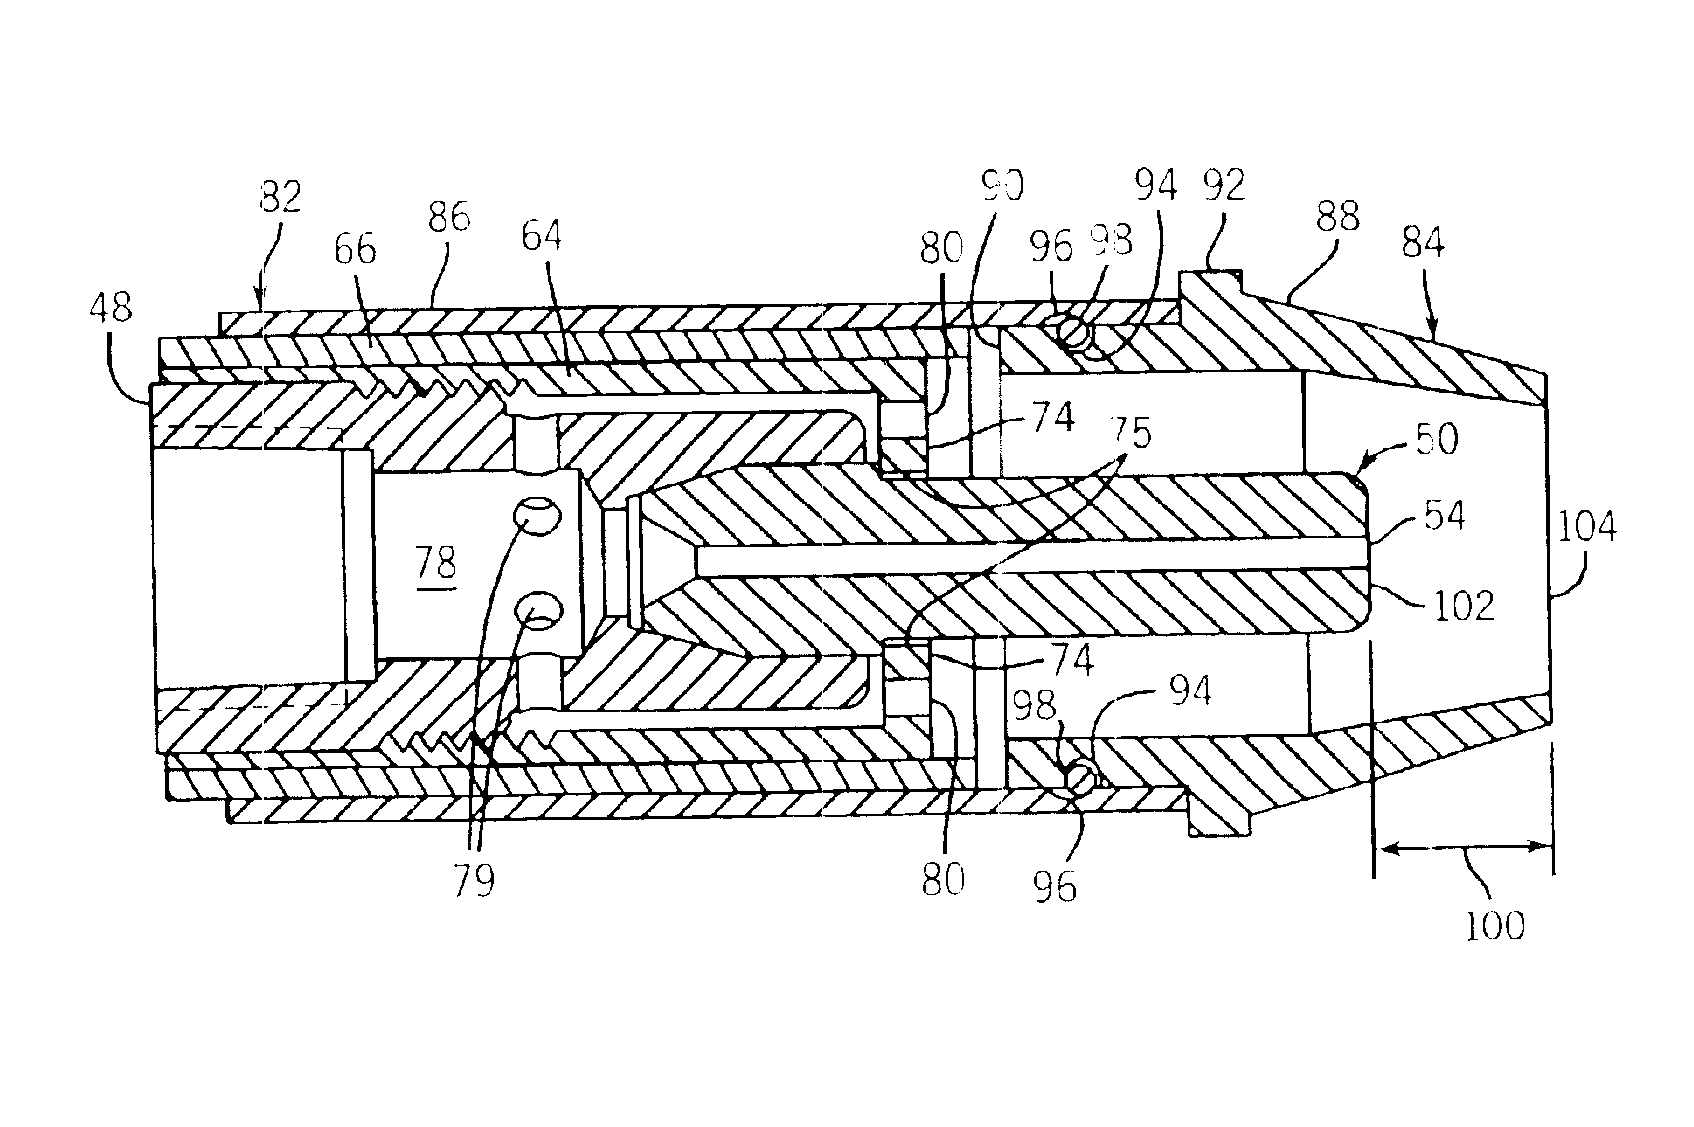 Welding gun having a removable nozzle end portion and method for operating same